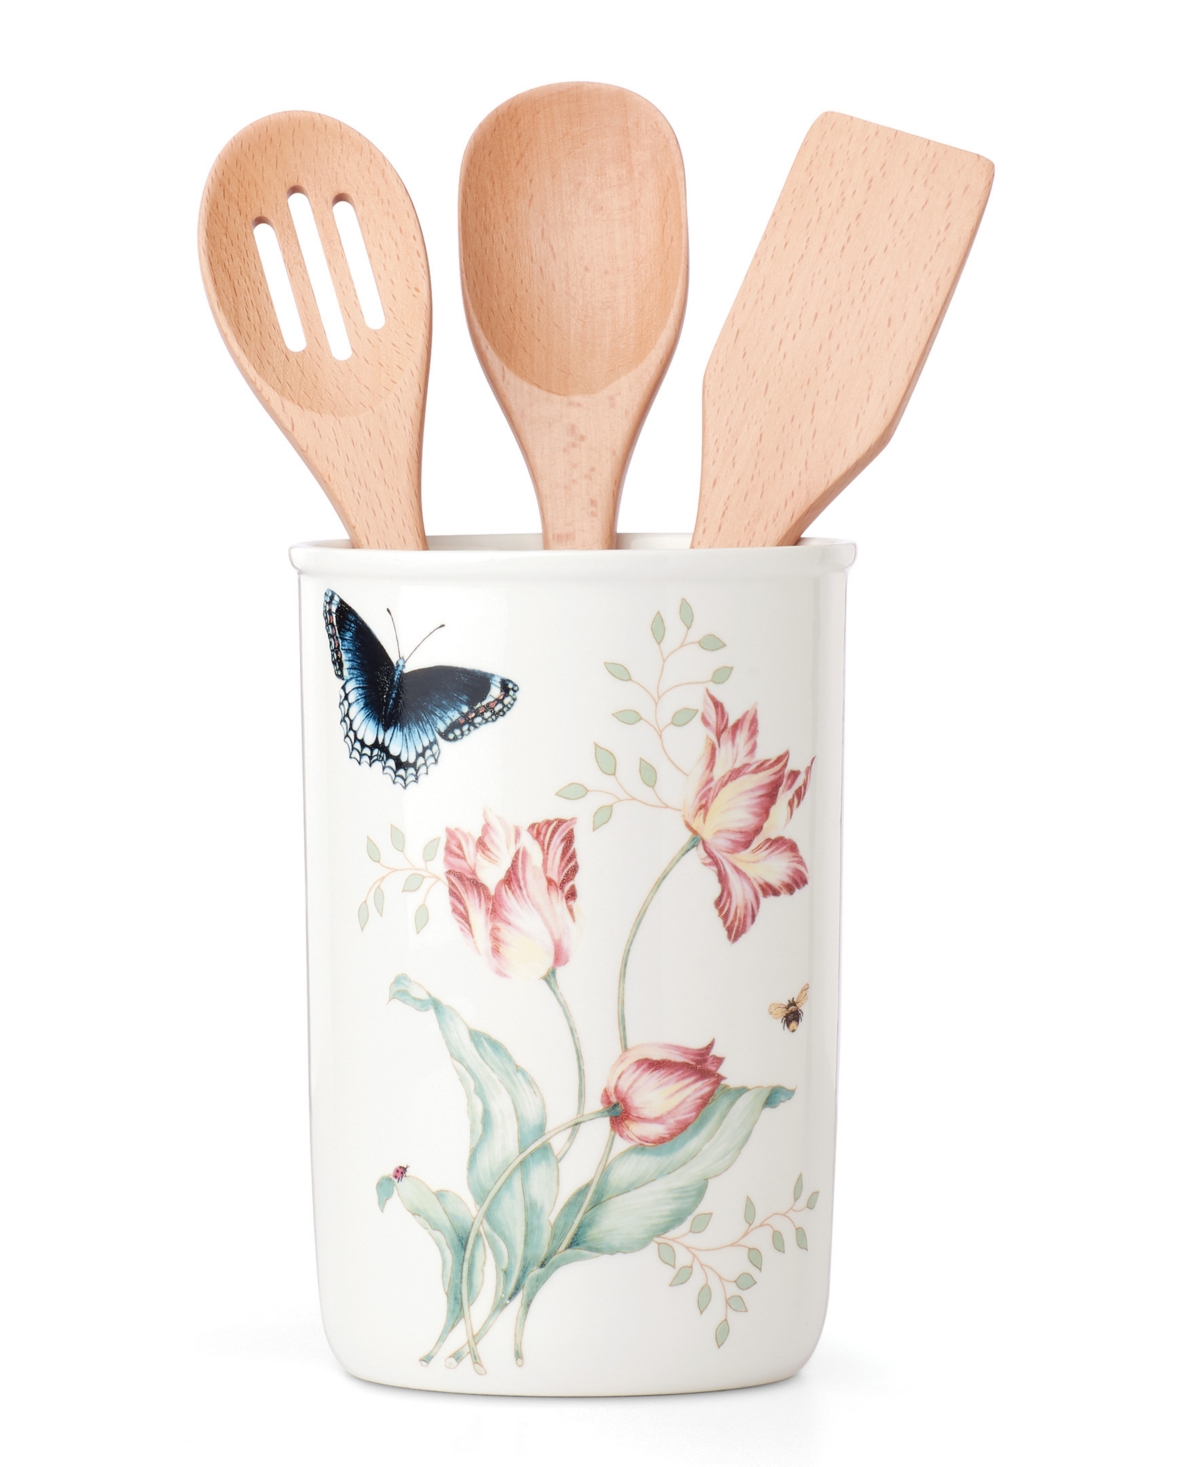 Butterfly Meadow Kitchen Jar with Utensils, Created for Macy's - White Body W/pastel Floral And Botanical